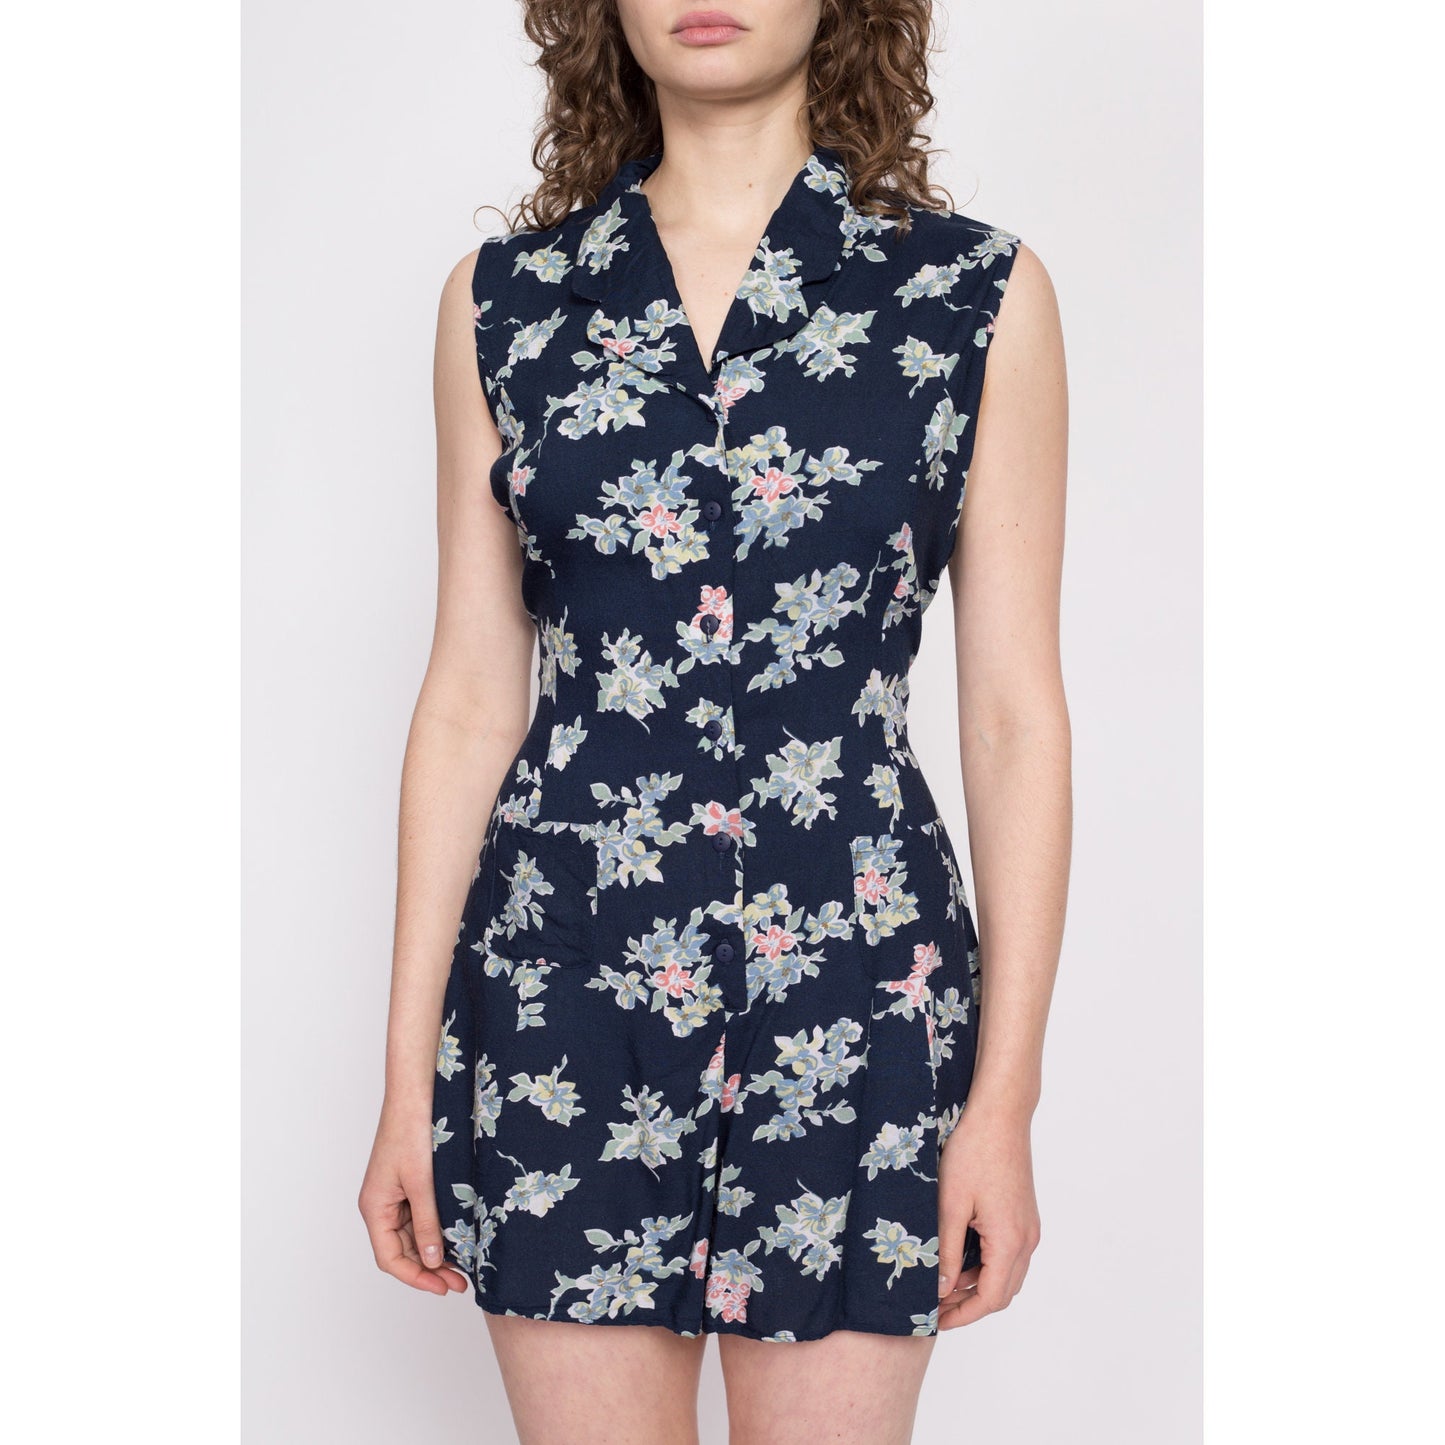 90s Navy Blue Floral Romper - Medium | Vintage Collared Button Up Sleeveless Playsuit